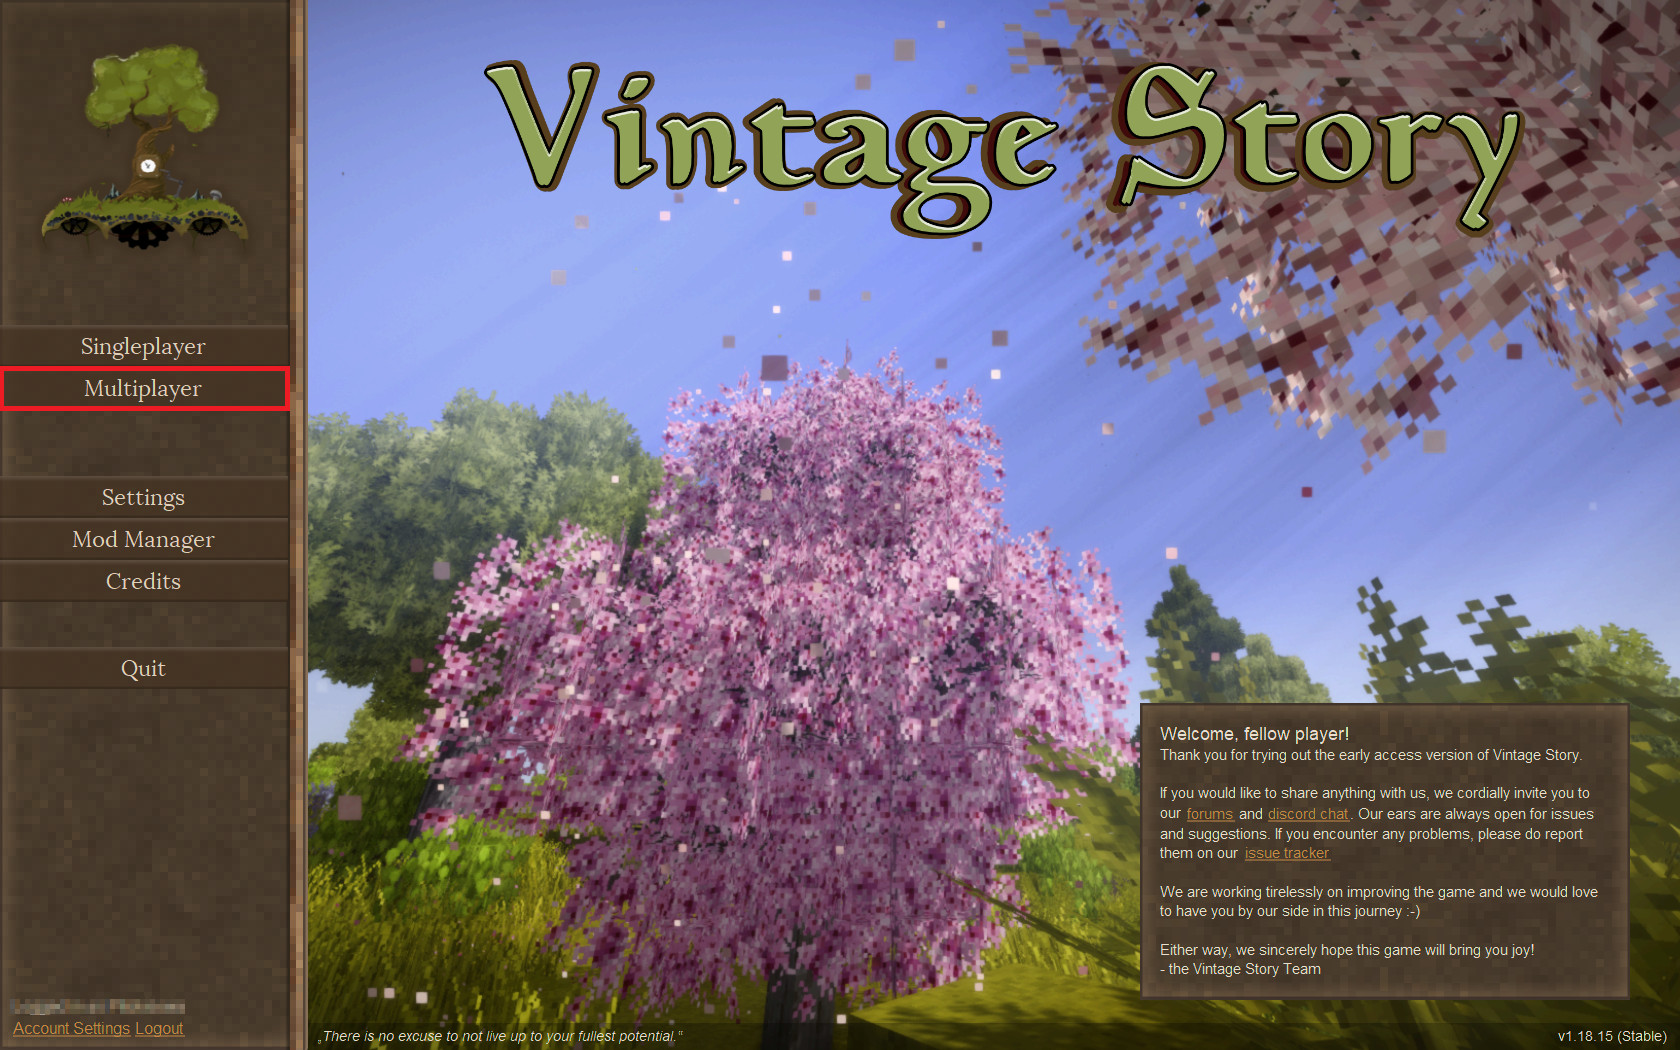 How to connect Vintage Story 5